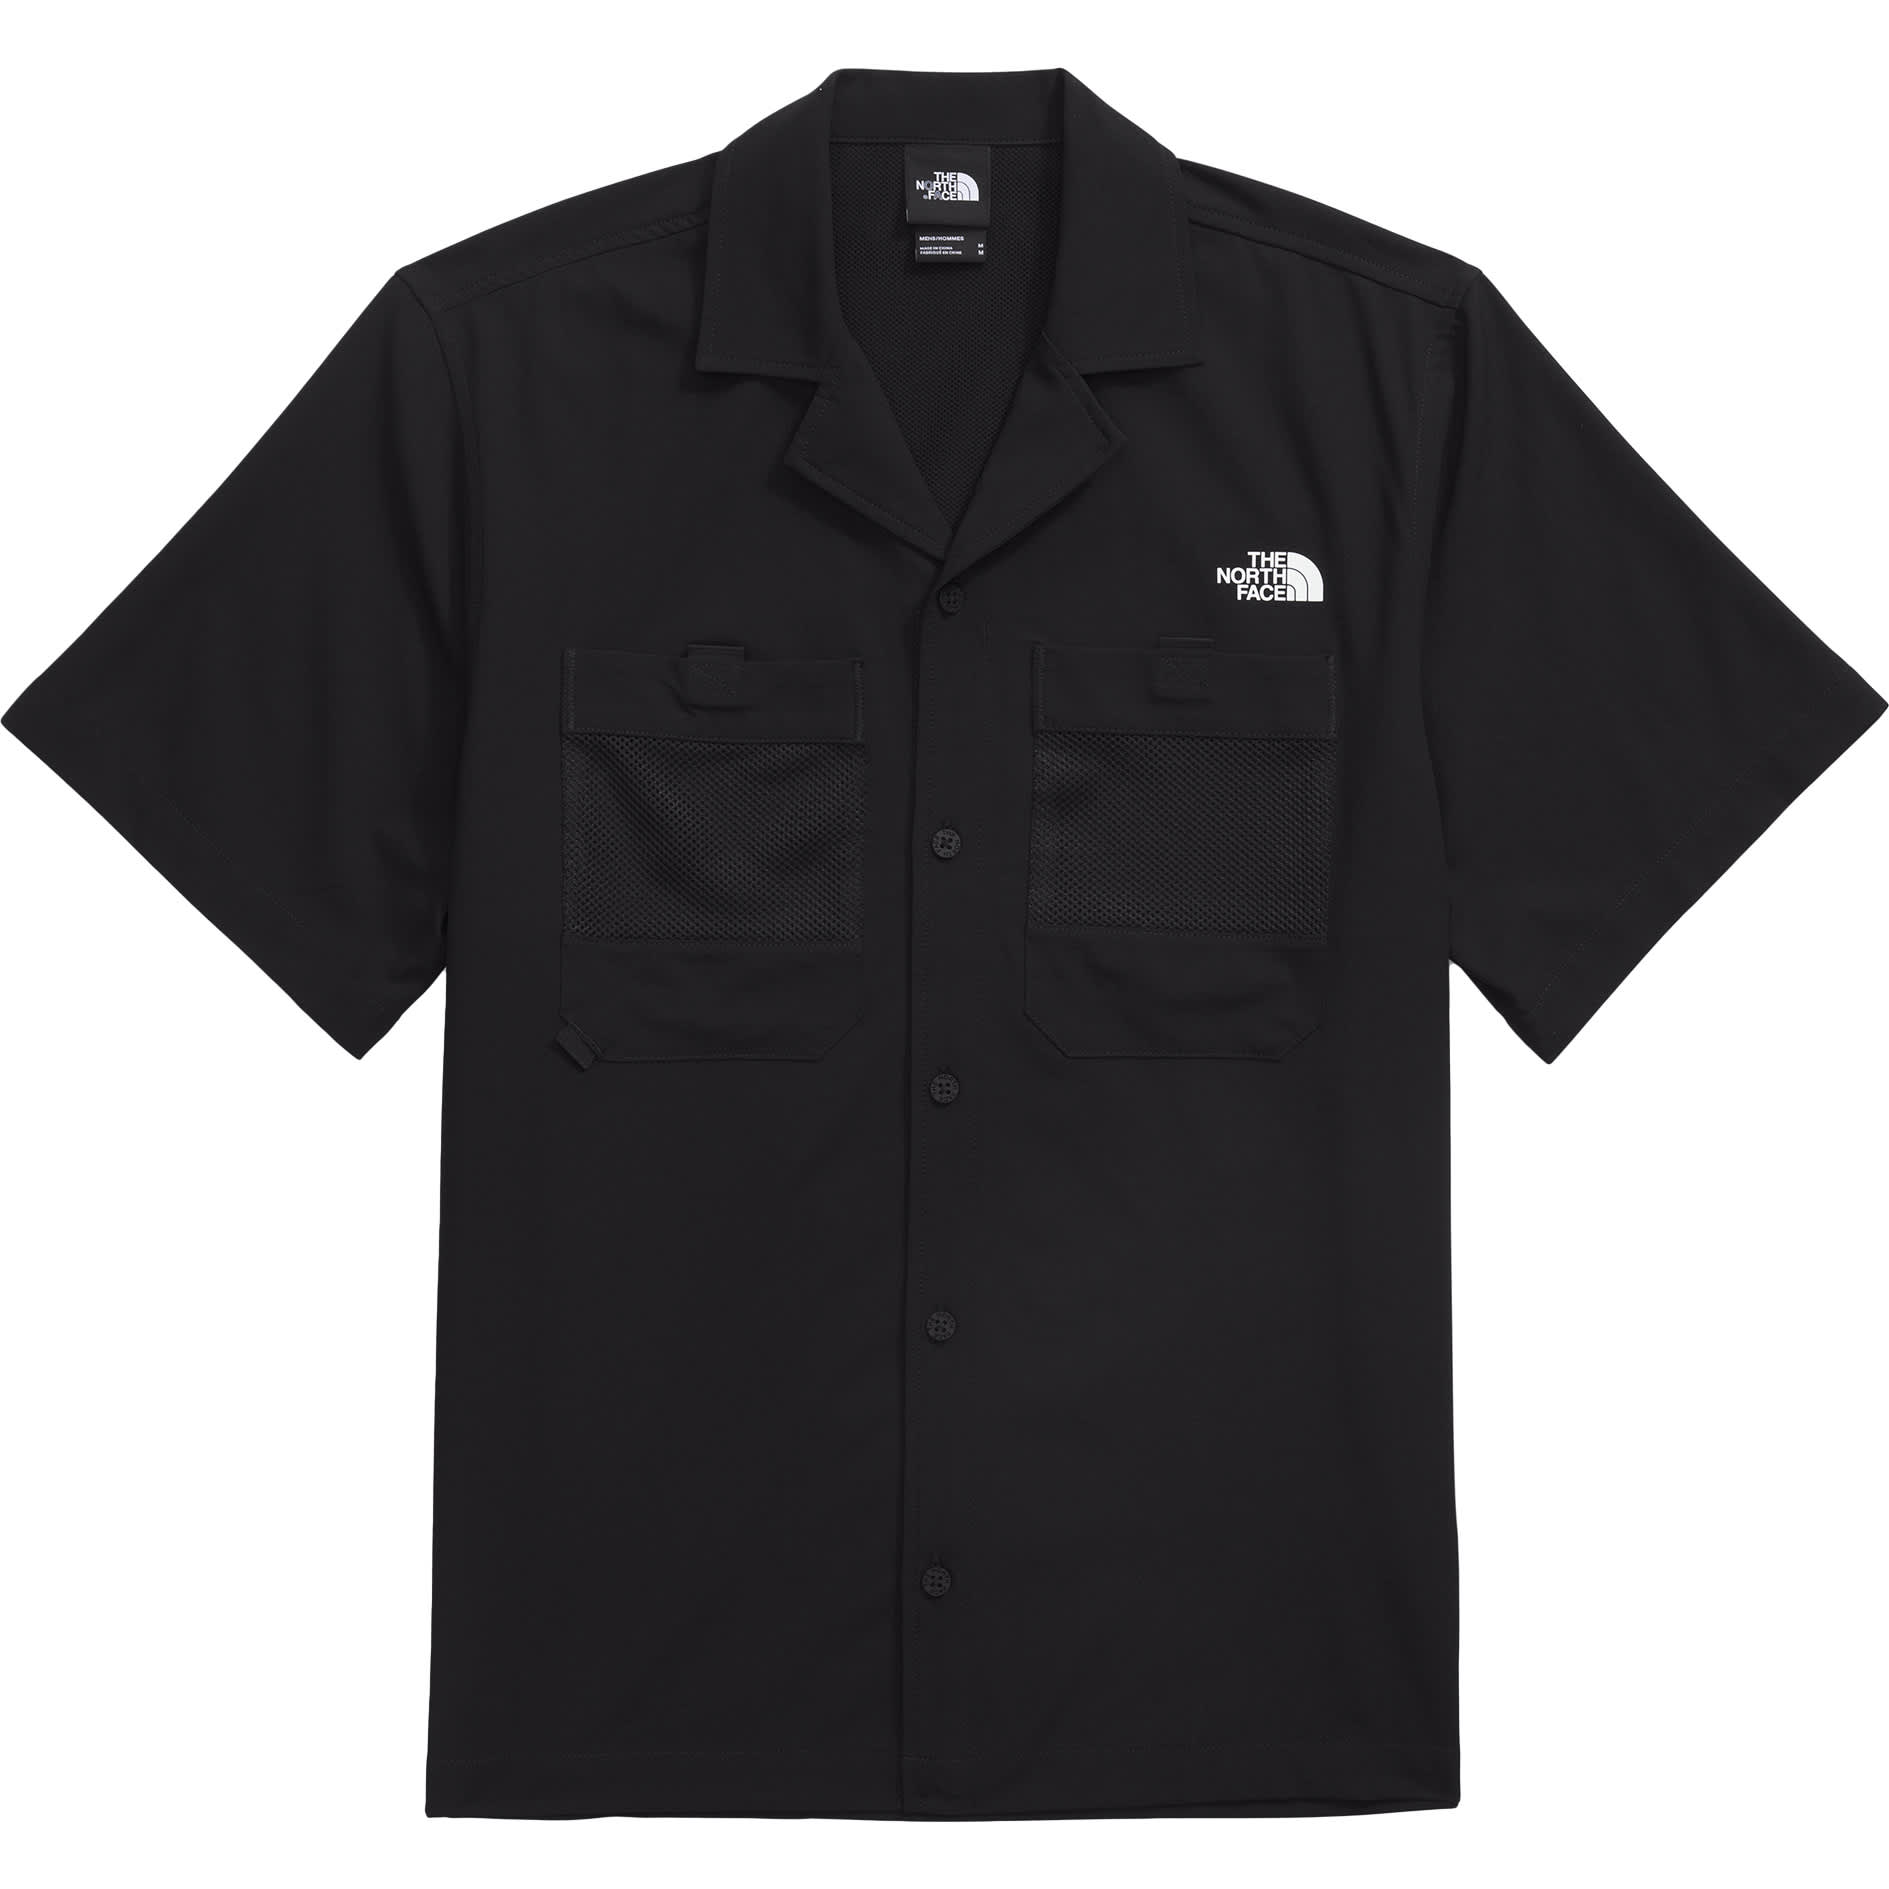 The North Face® Men’s First Trail Short Sleeve Shirt